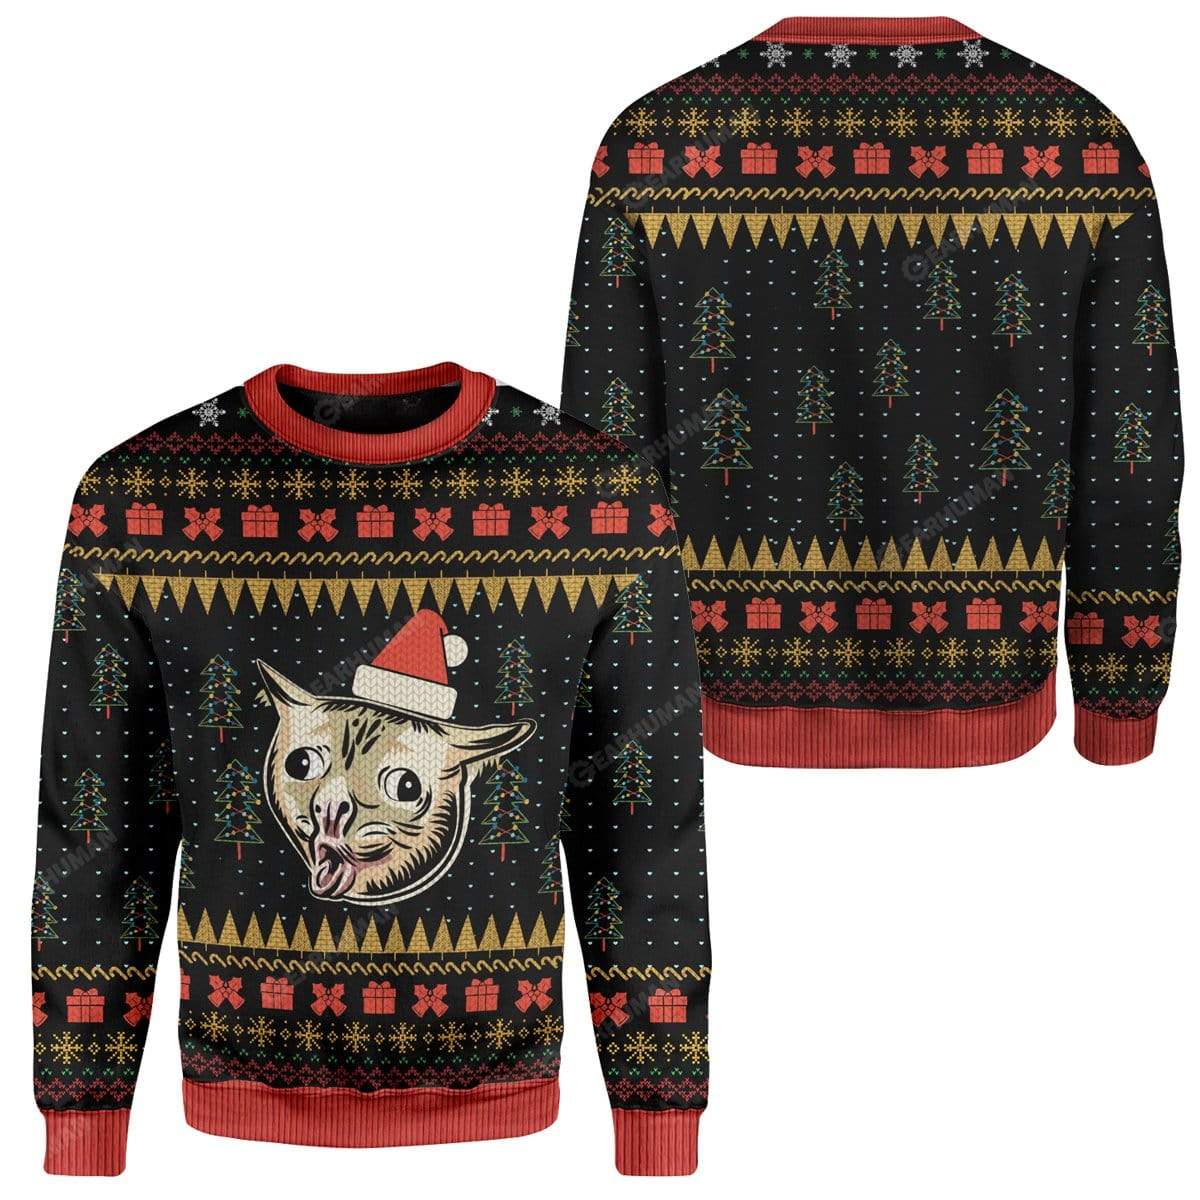 Ugly Christmas Coughing Cat Meme Sweater Apparel CT-AT2711194 Ugly Christmas Sweater 